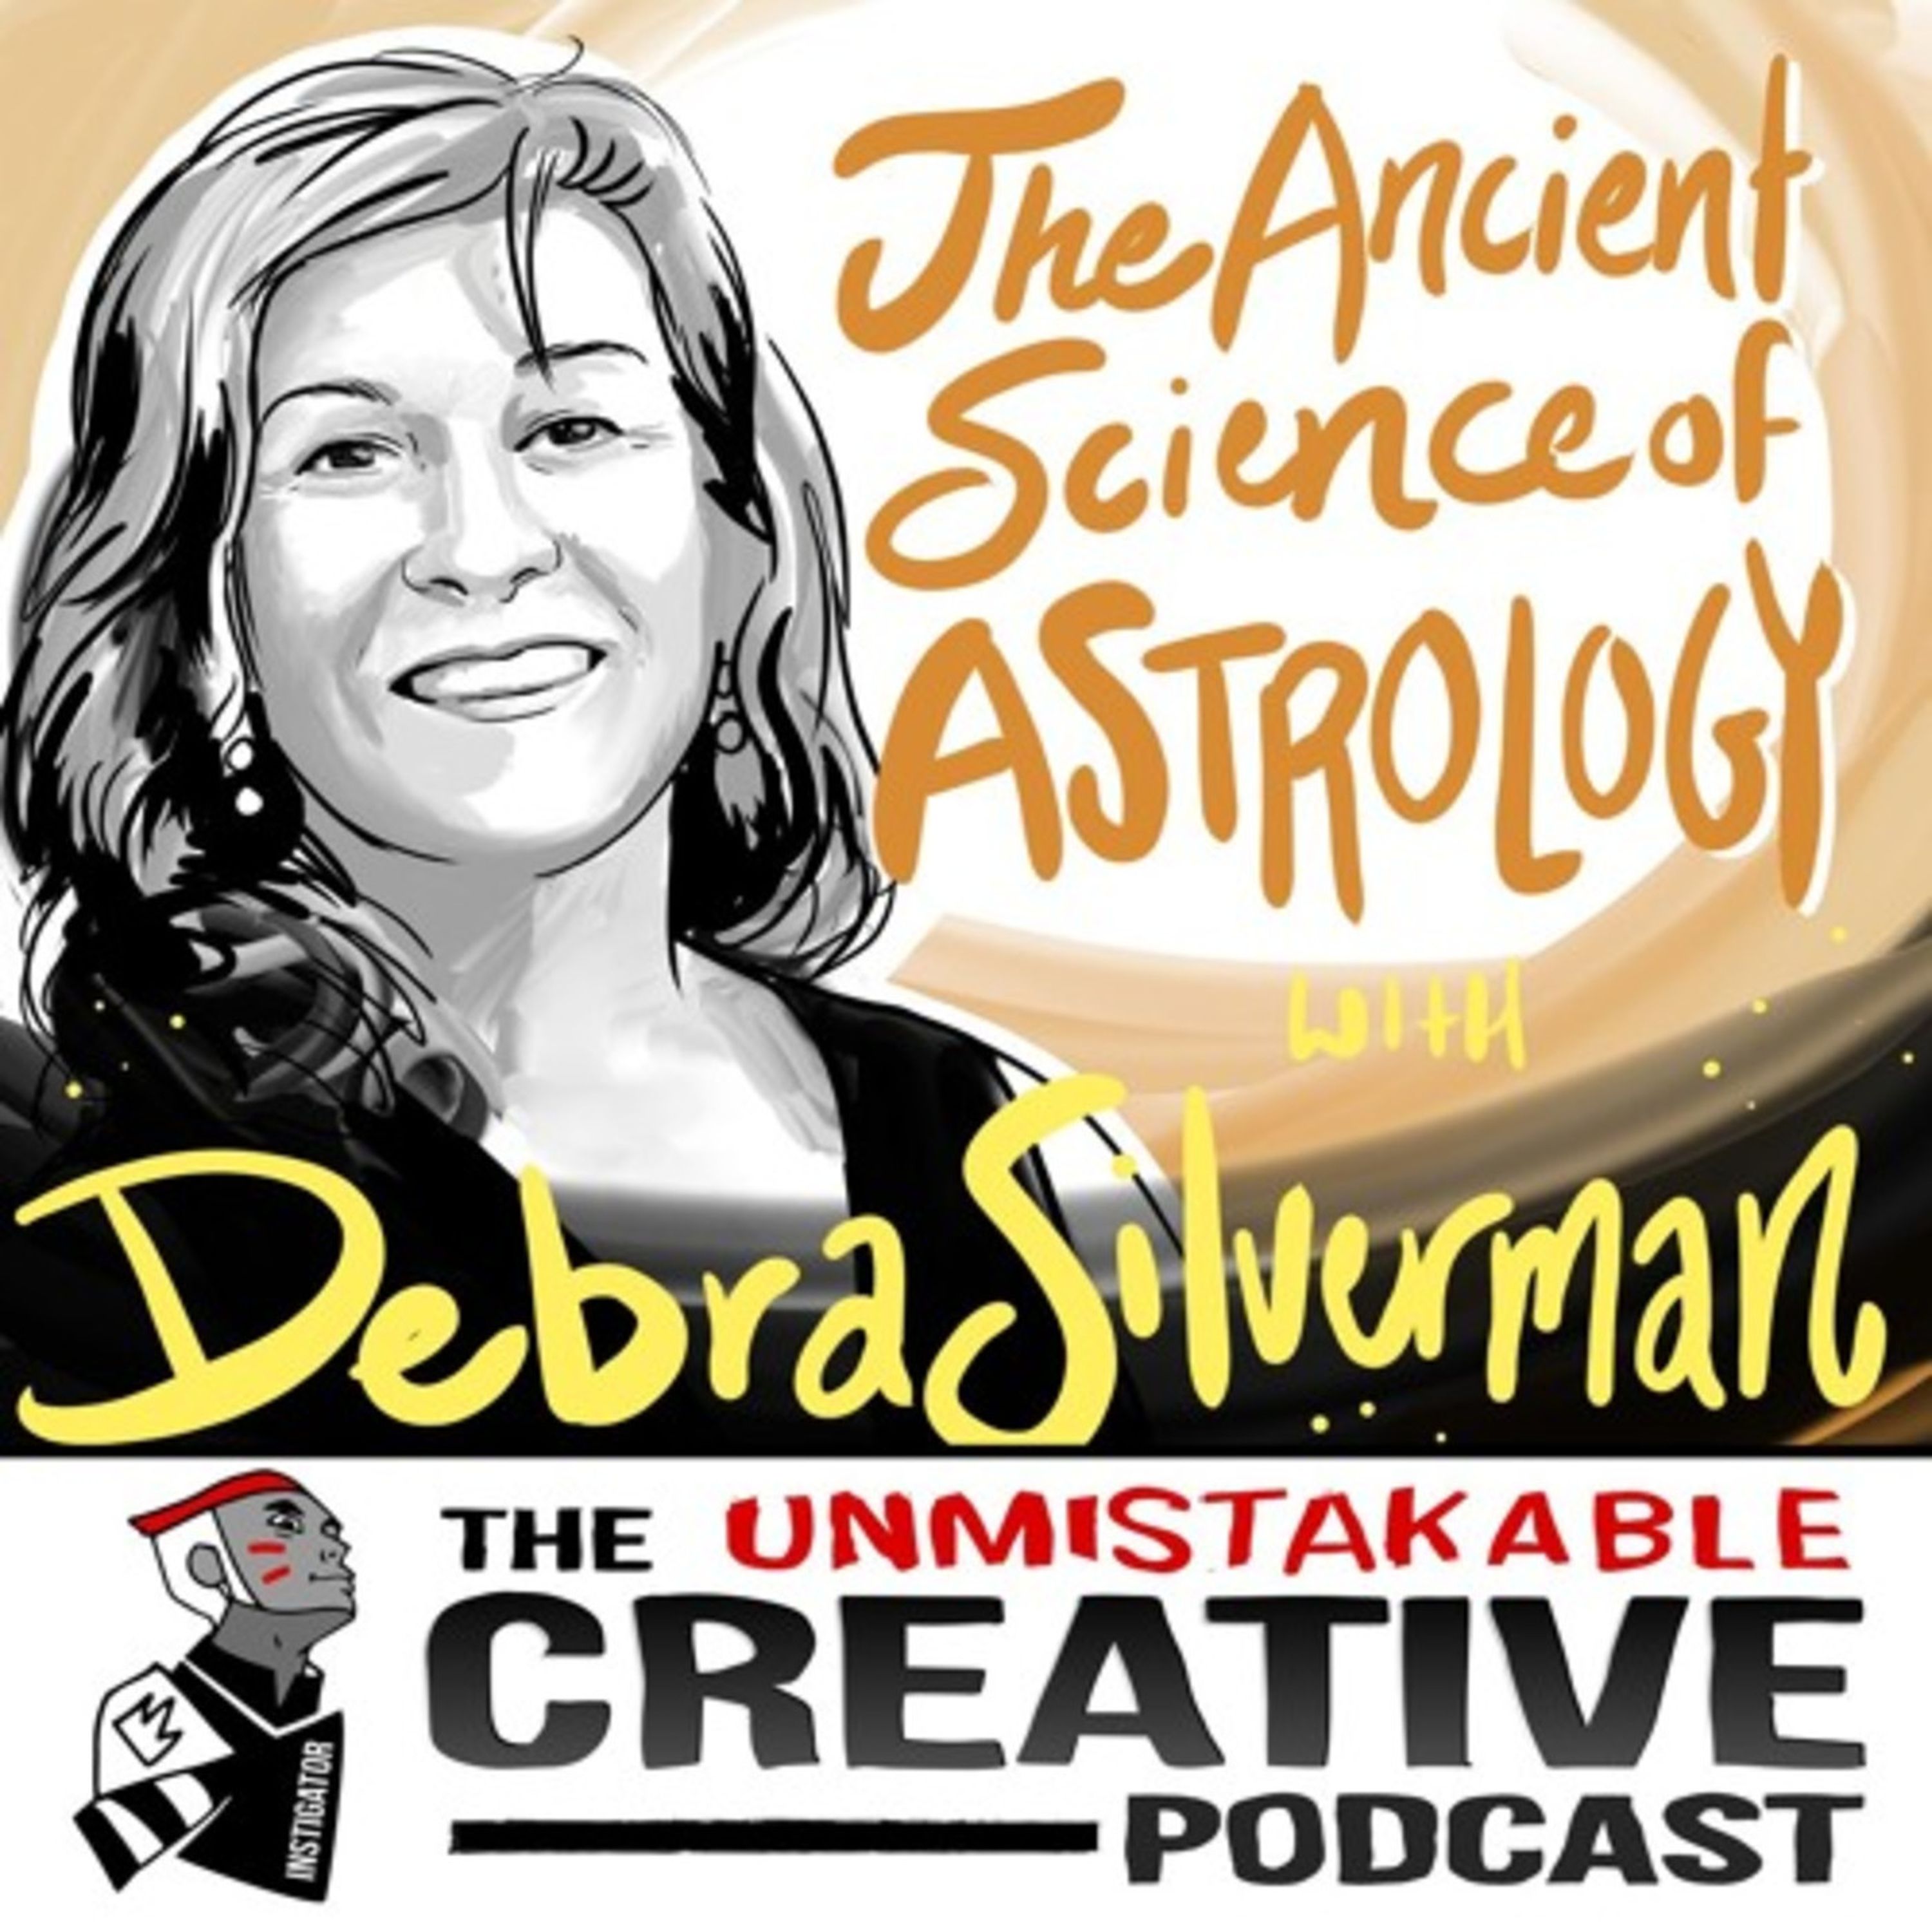 Debra Silverman: The Ancient Science of Astrology